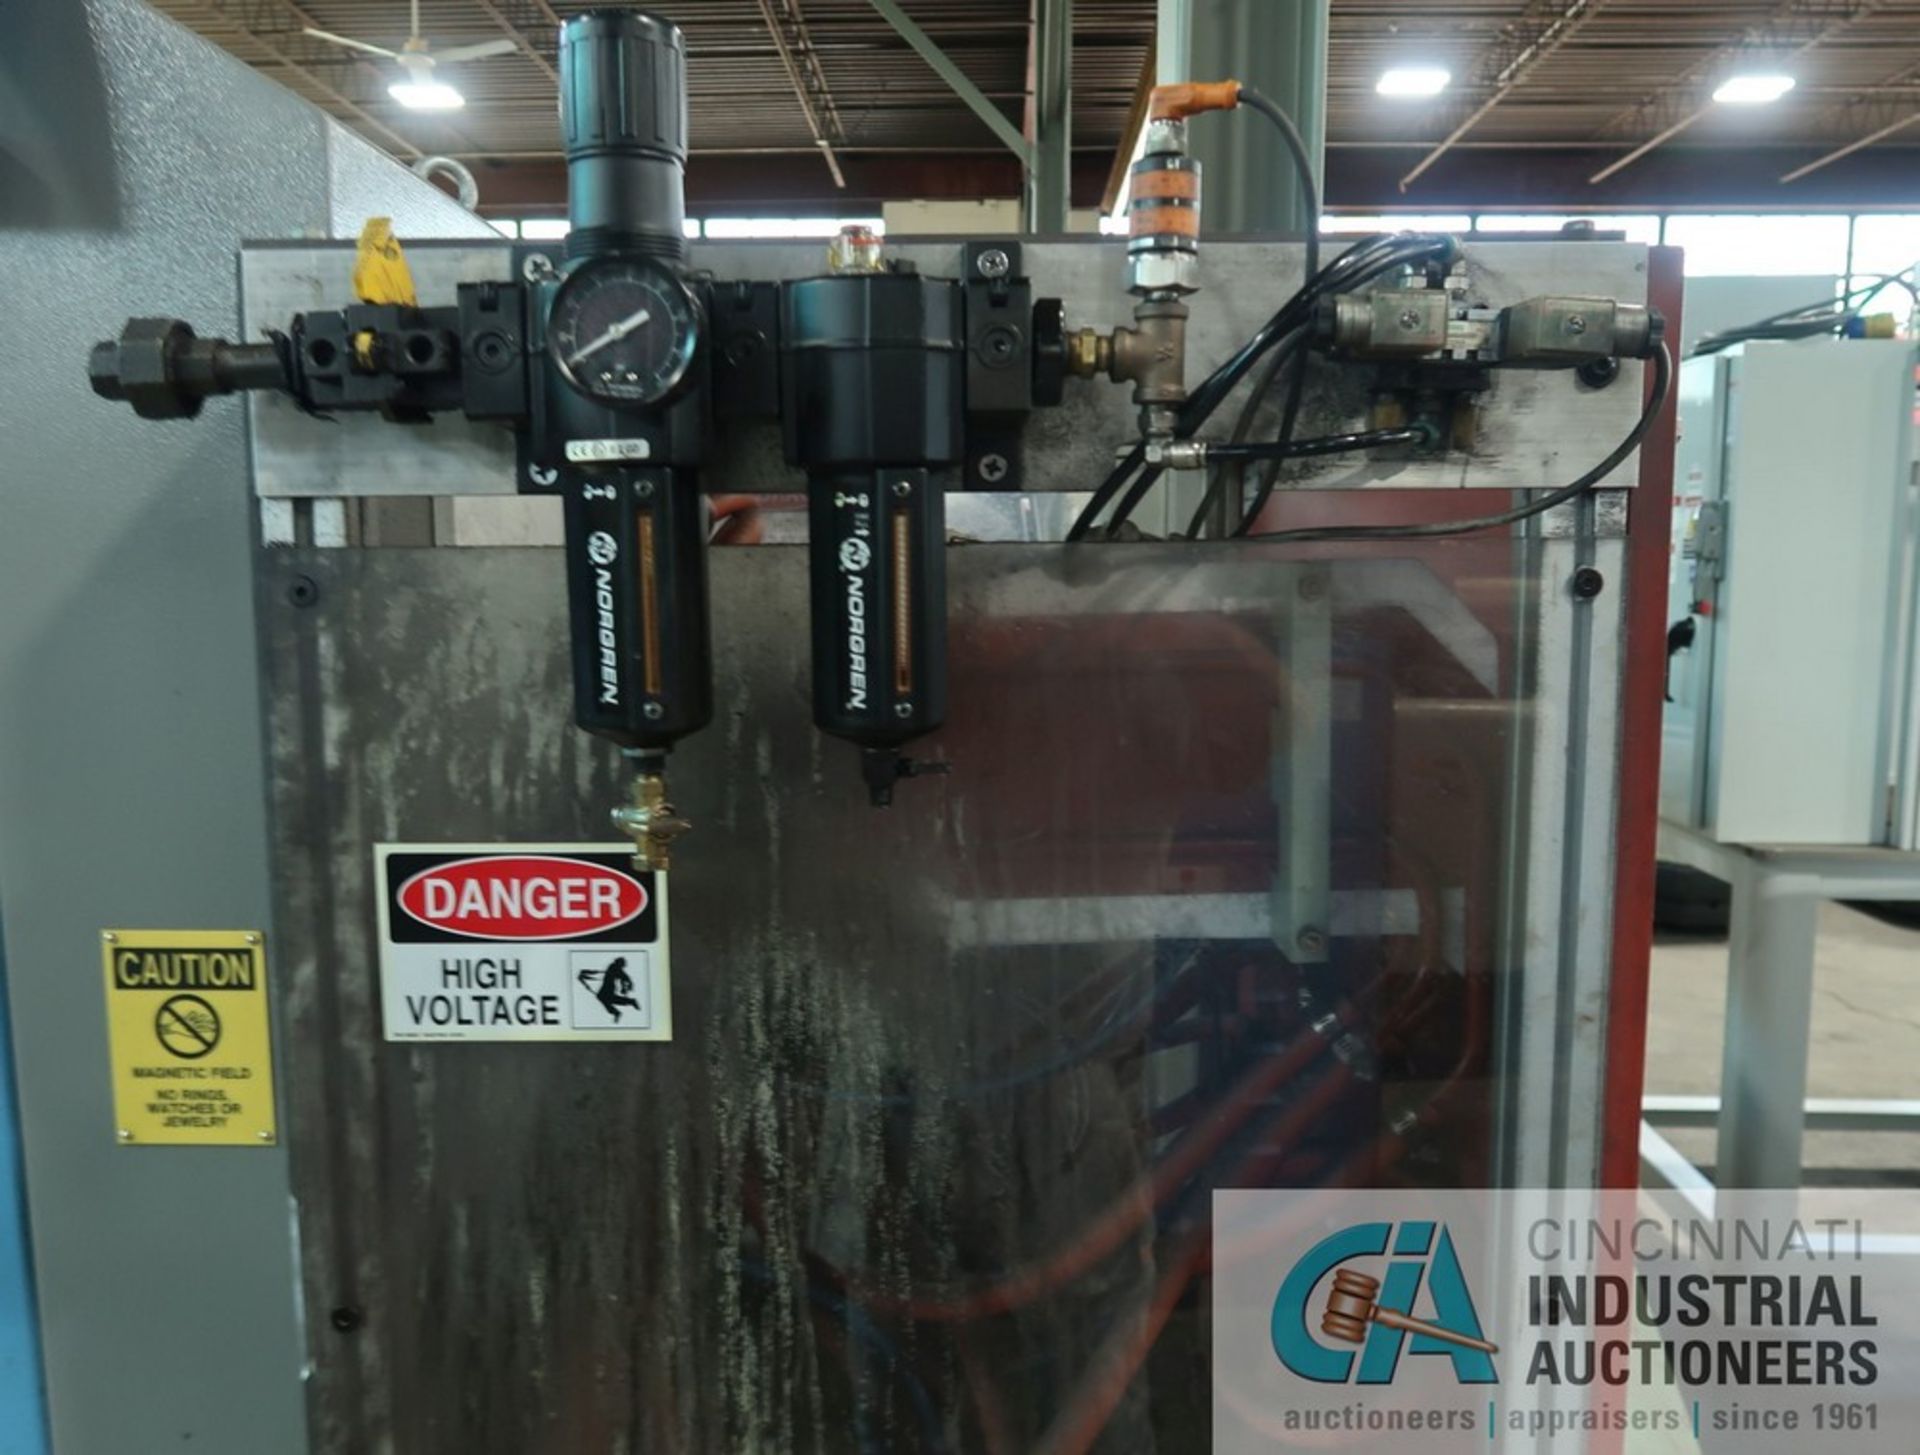 100 KW THERMATOOL RADYNE MODEL CFM3-1006460 INDUCTION HEATER; S/N 2778, 2-STATION HEAT STATION AND - Image 10 of 16